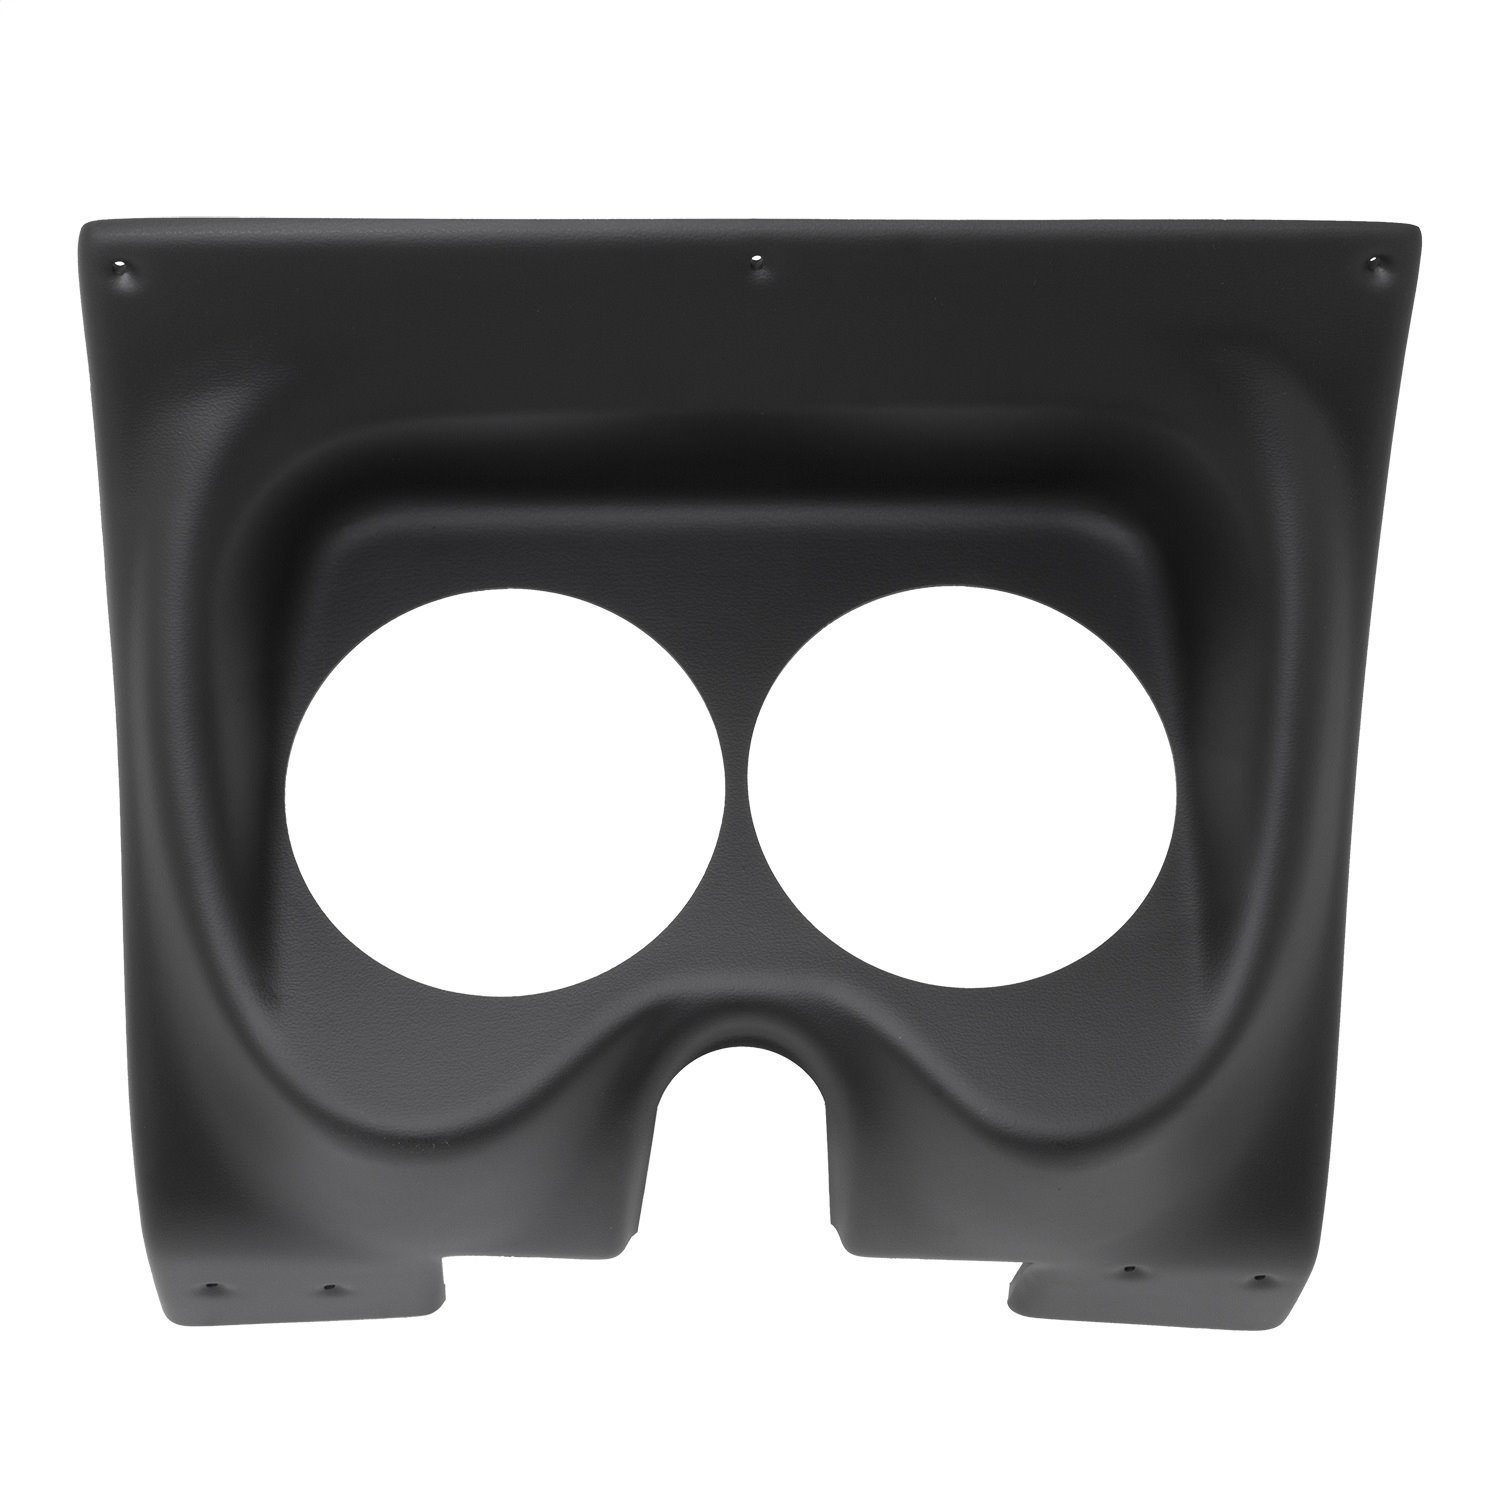 Black Finish Faceplate for 2210